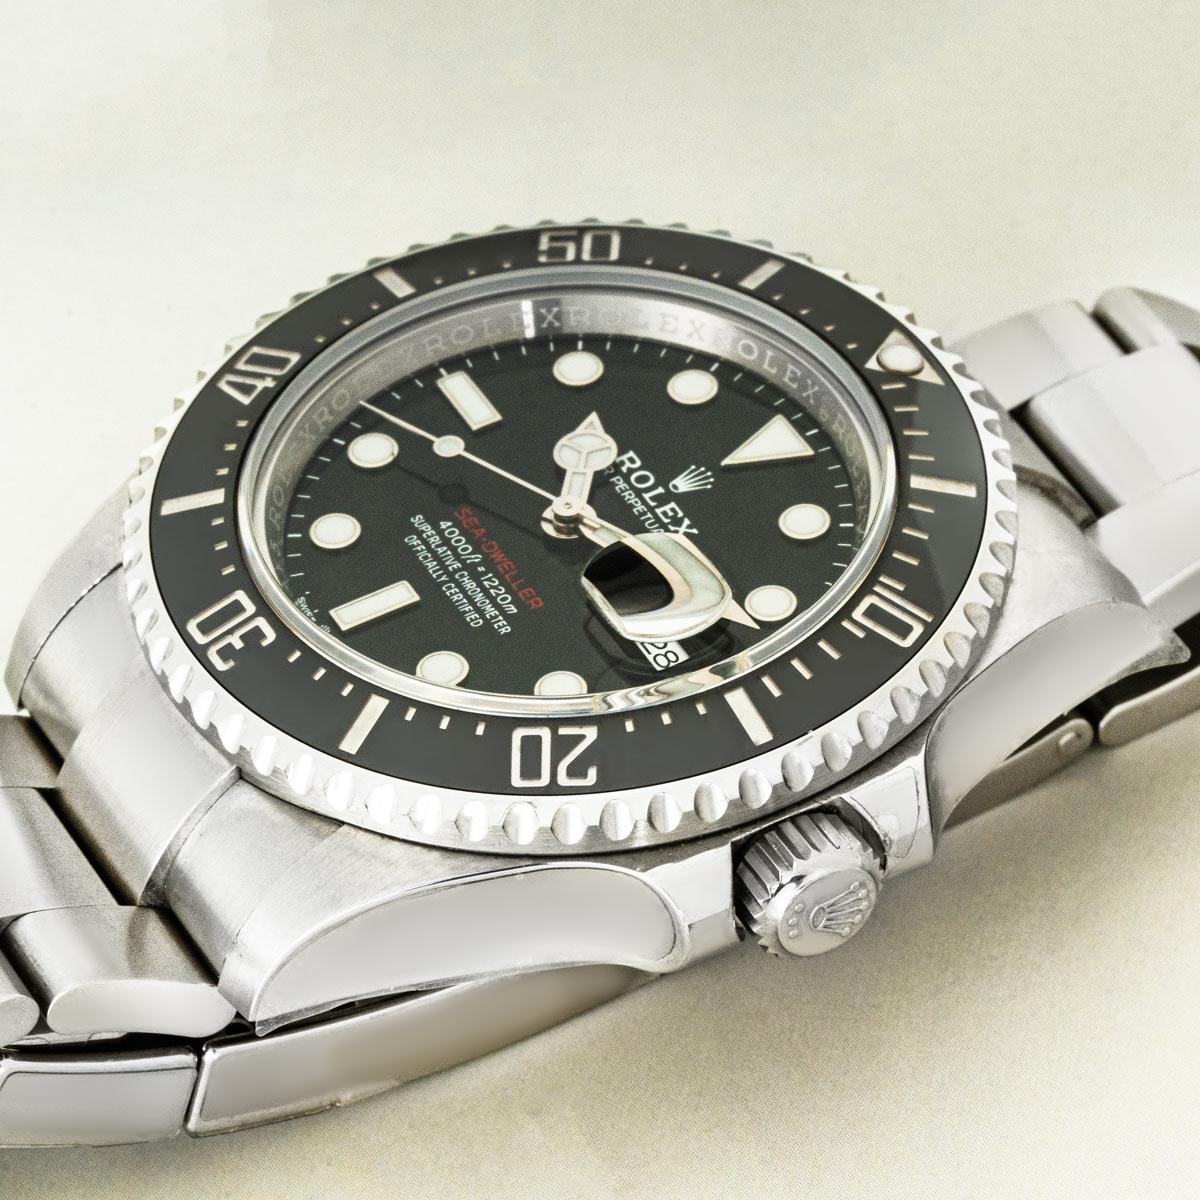 A 43mm Red Writing Sea-Dweller by Rolex in stainless steel. Featuring a black dial with a date display and a steel uni-directional rotatable bezel with a ceramic black insert as well as 60-minute graduations coated in platinum.

Equipped with an